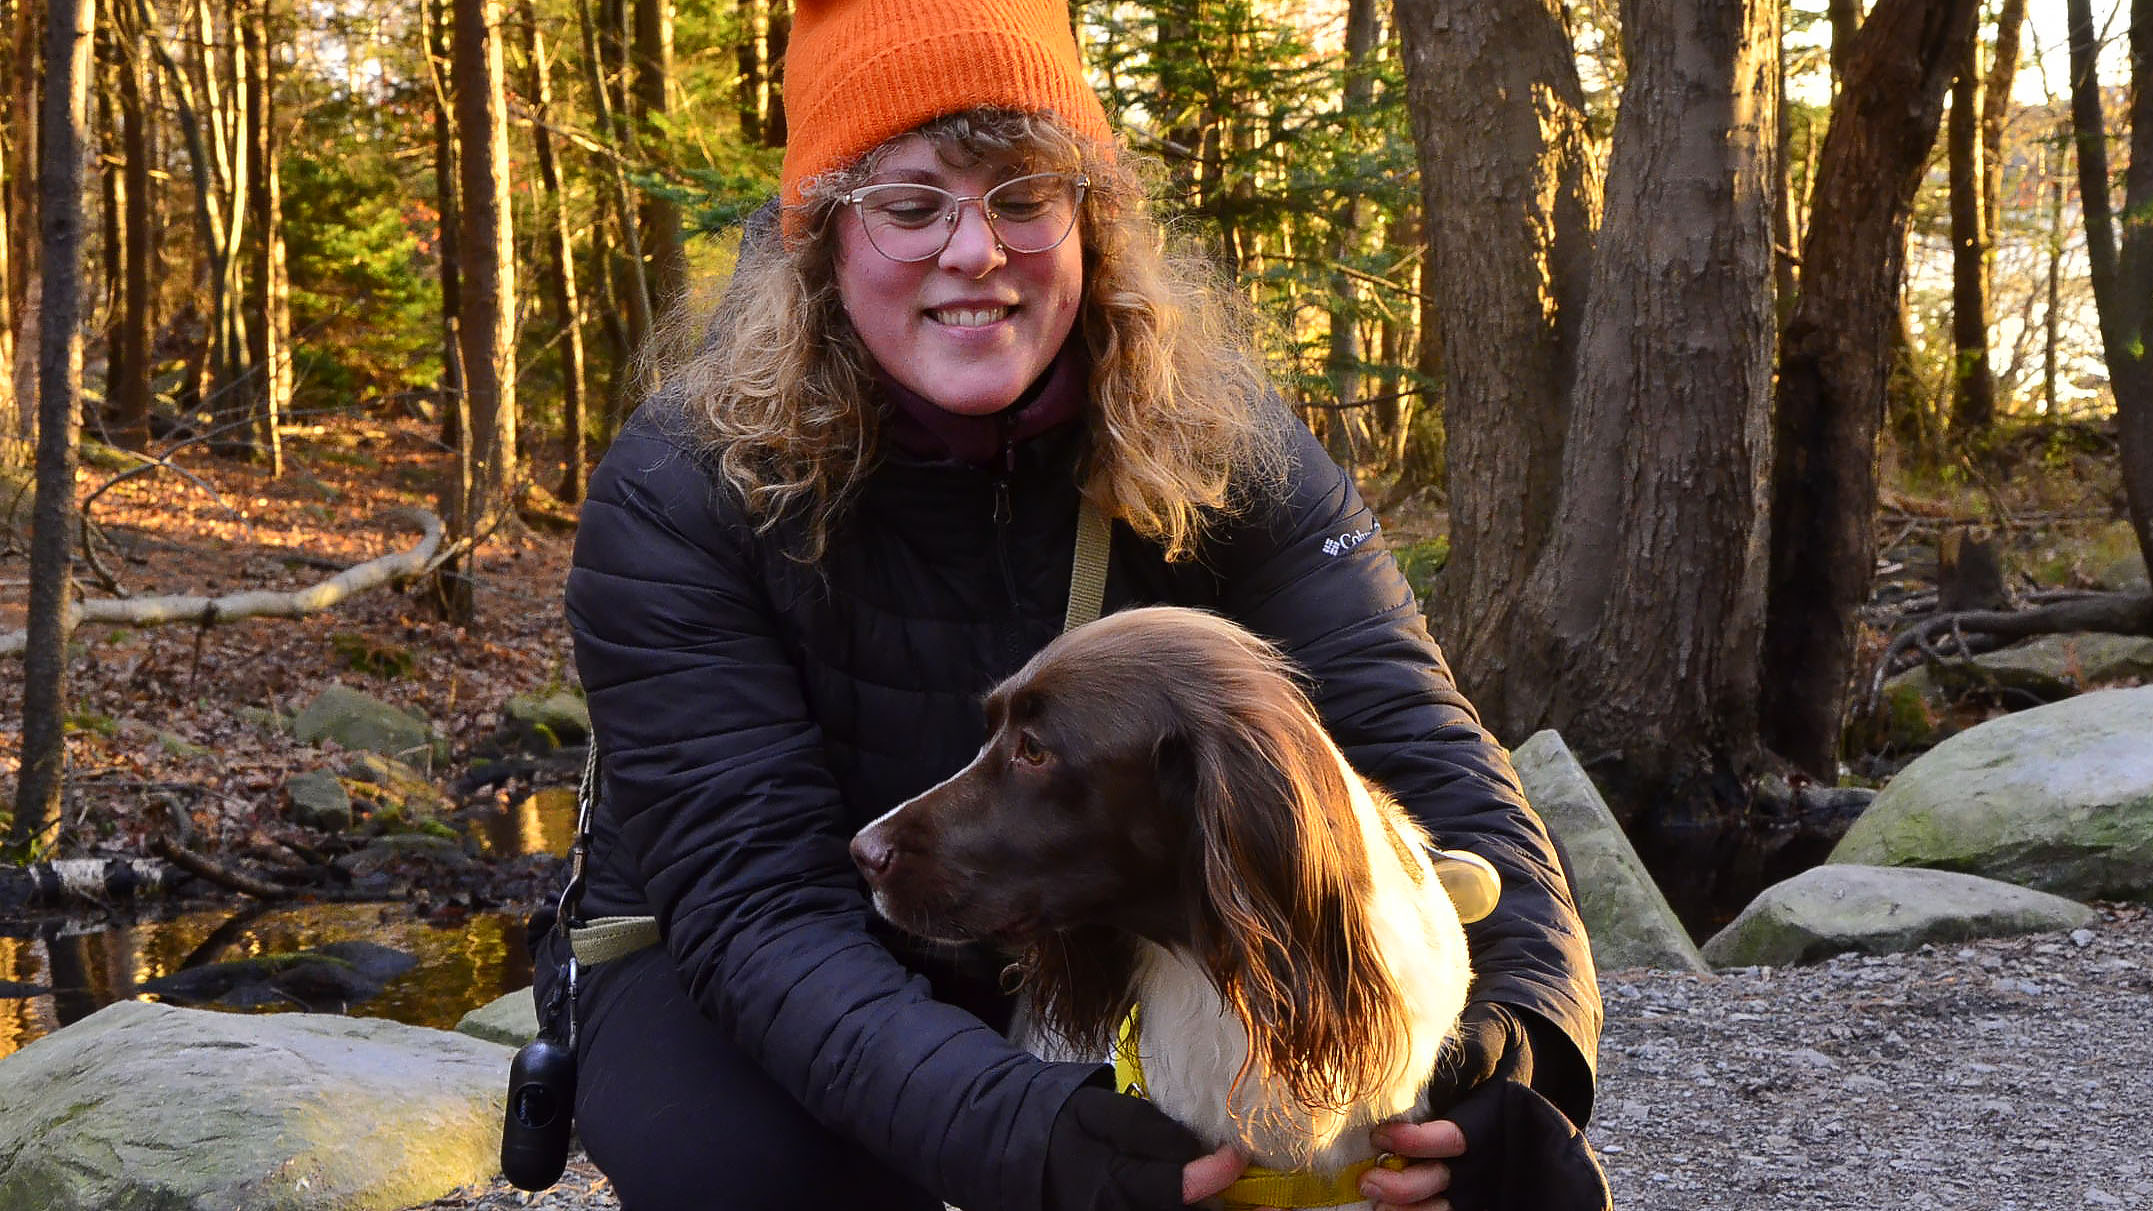 A woman with curly blonde hair, glasses and an orange hat has her arms around a brown and white dog.